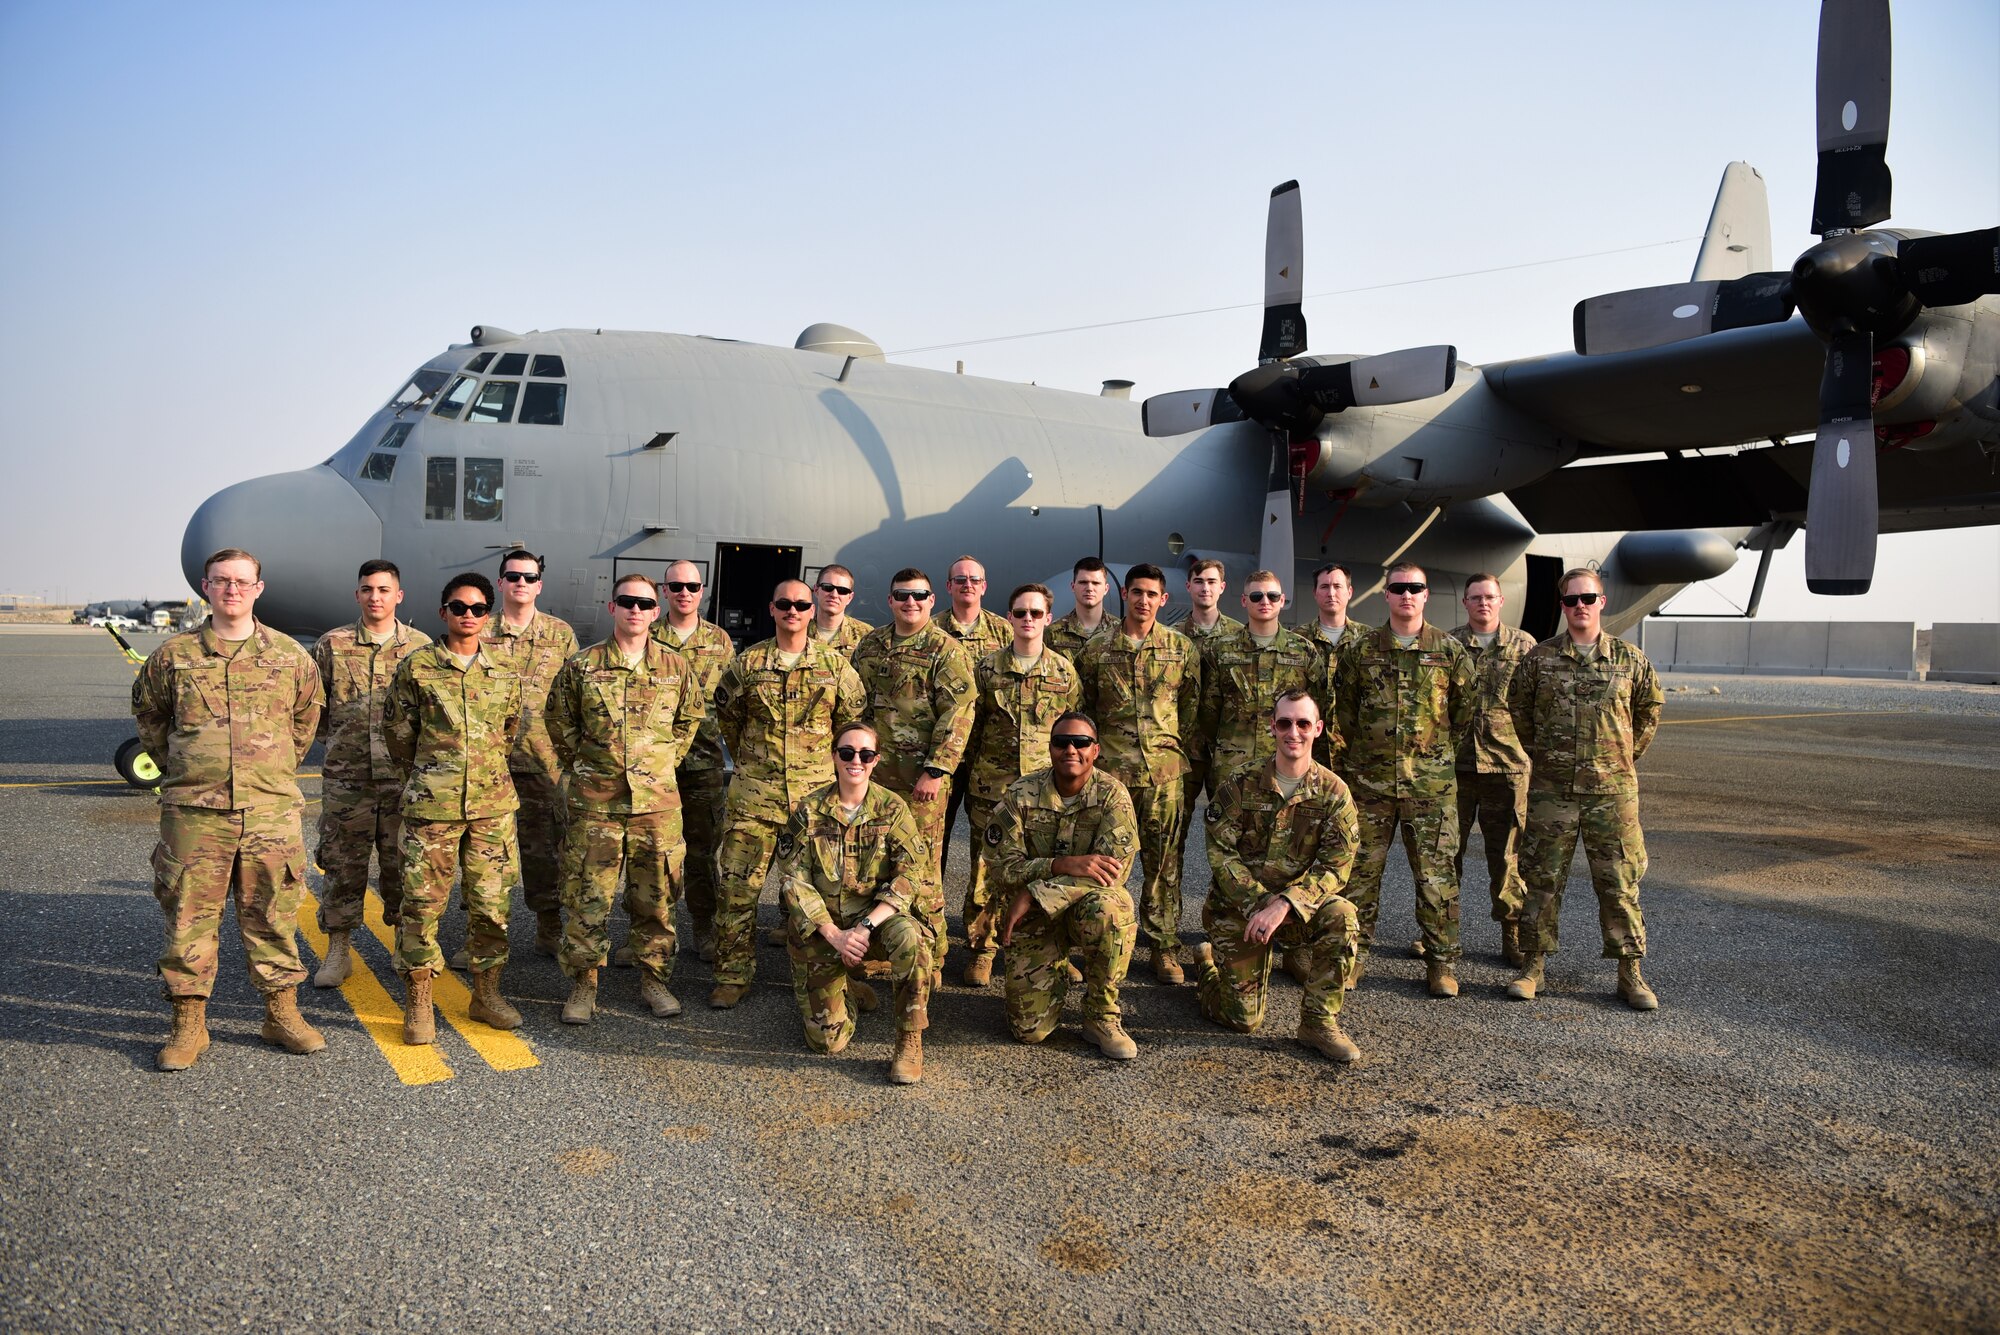 Members of the 43rd Expeditionary Electronic Combat Squadron and the 386th Expeditionary Aircraft Maintenance Squadron pose for a photo Sept. 21, 2018, at an undisclosed location in Southwest Asia. The 43rd EECS uses EC-130H aircraft to deny the communications capability enemy ground forces need to coordinate an attack, creating chaos and confusion. (U.S. Air Force photo by Staff Sgt. Christopher Stoltz)